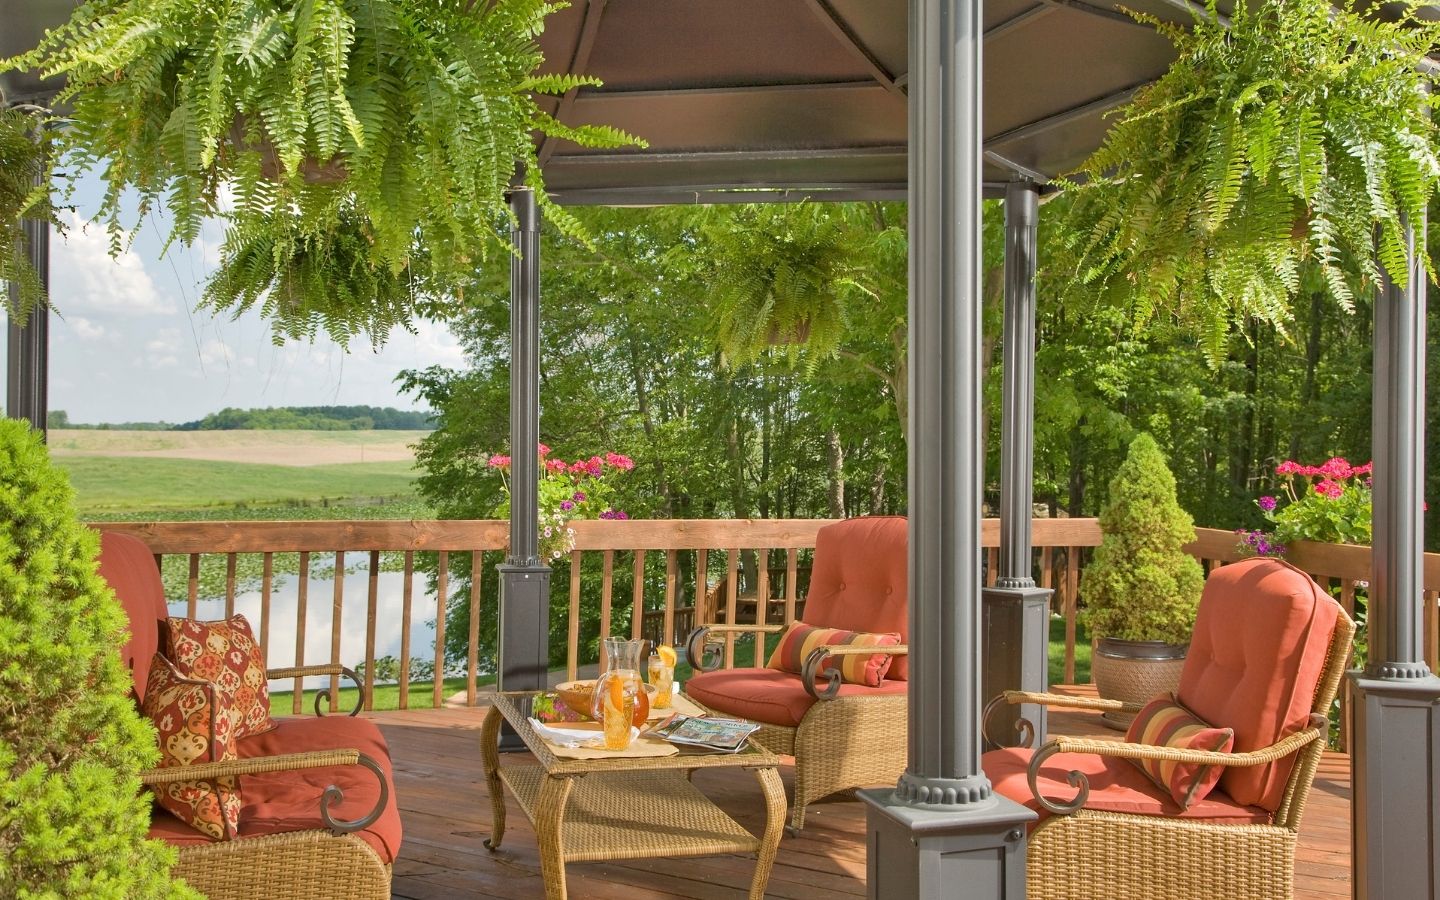 Gazebo by the water with tables and chairs